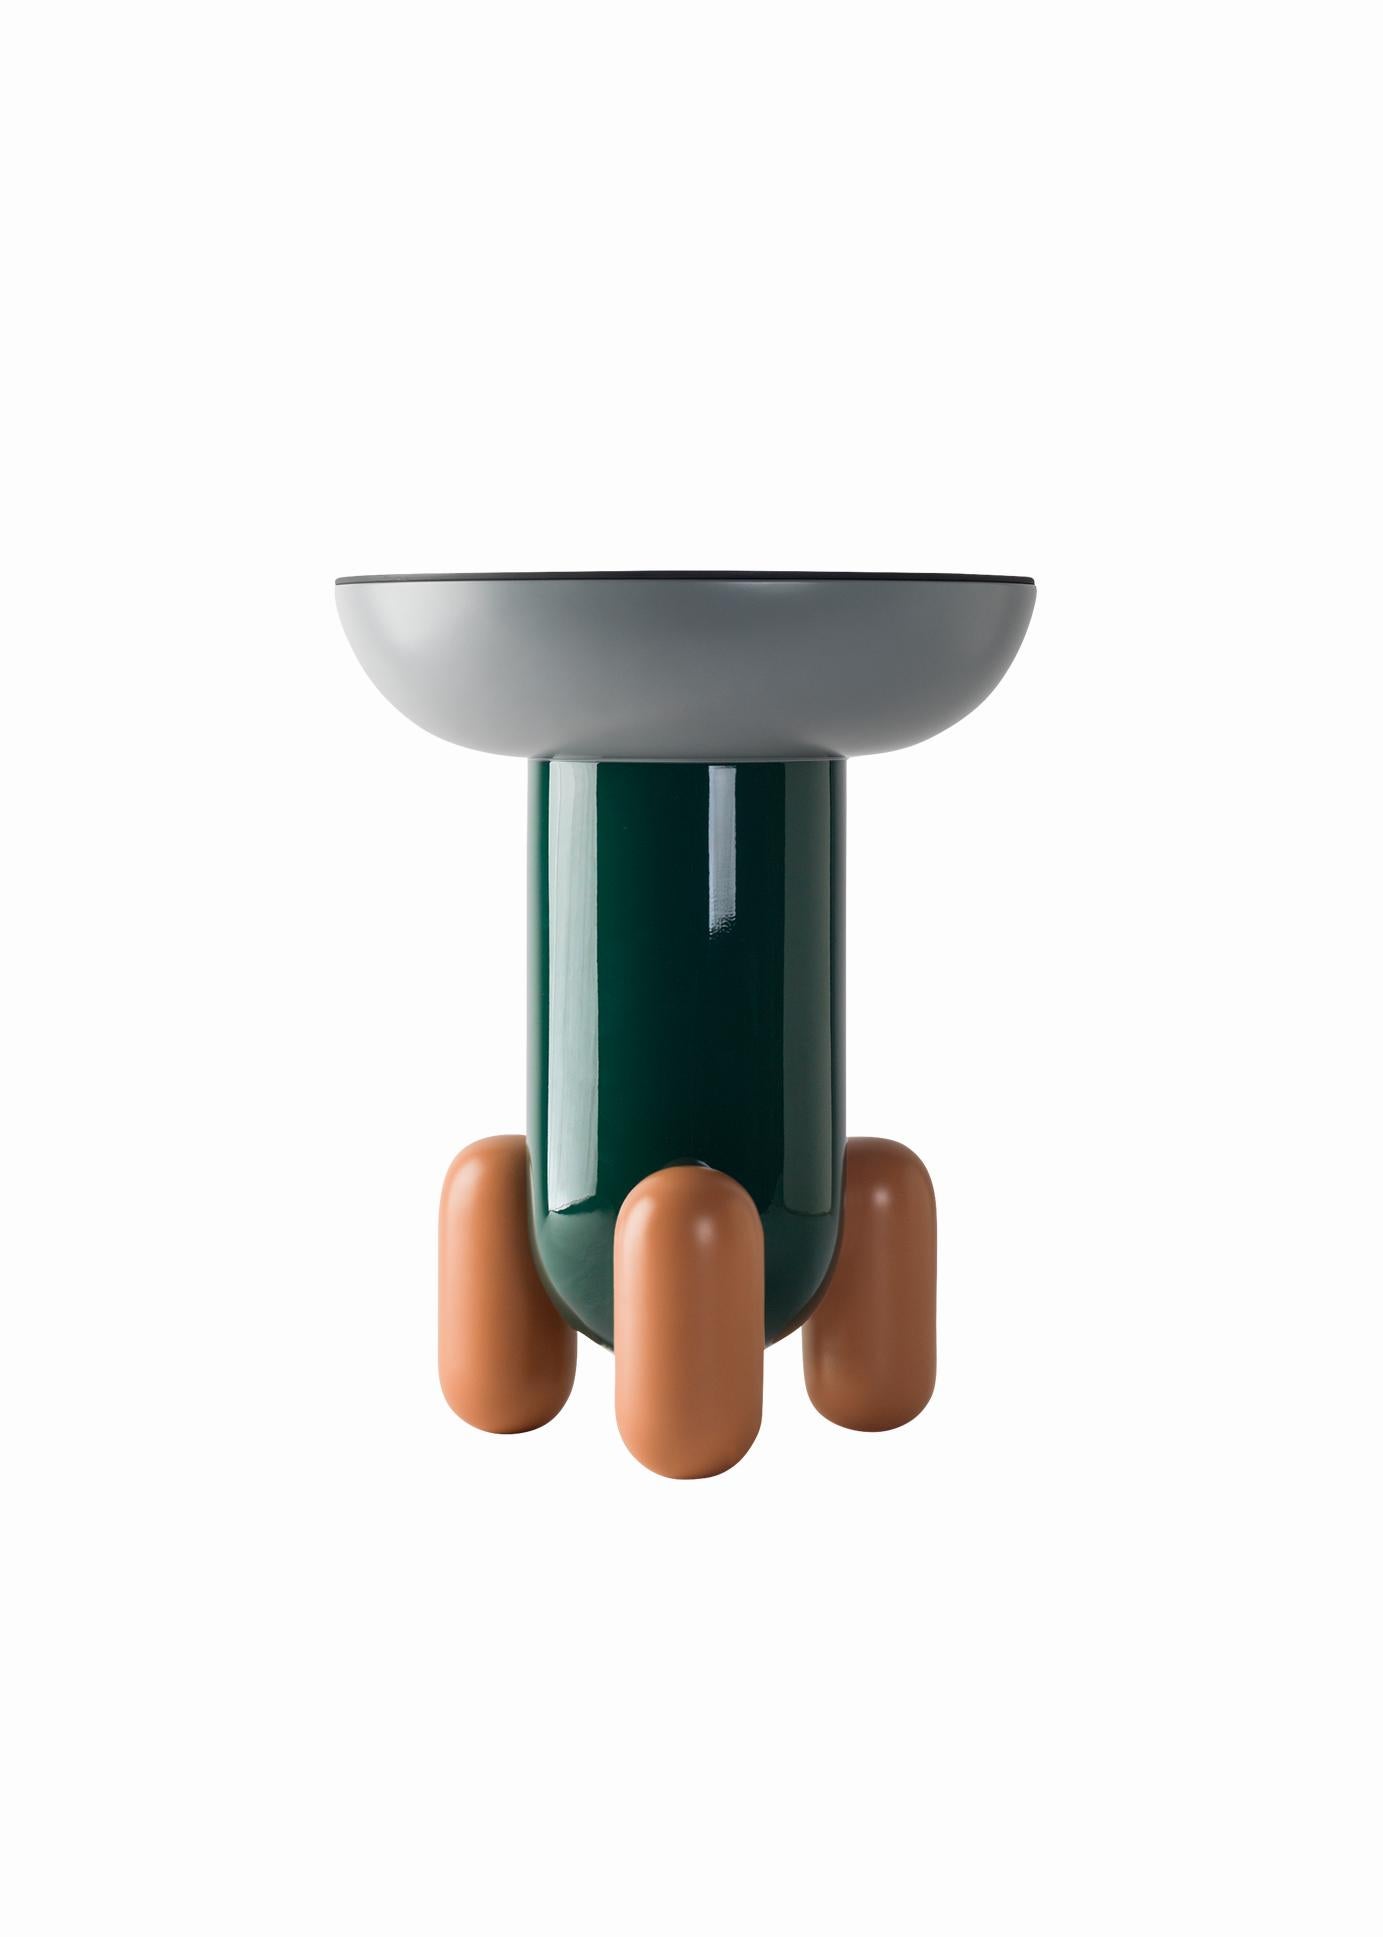 Organic Modern Contemporary Side Table 'Explorer 1' by Jaime Hayon, Multicolor Green, 50 cm For Sale